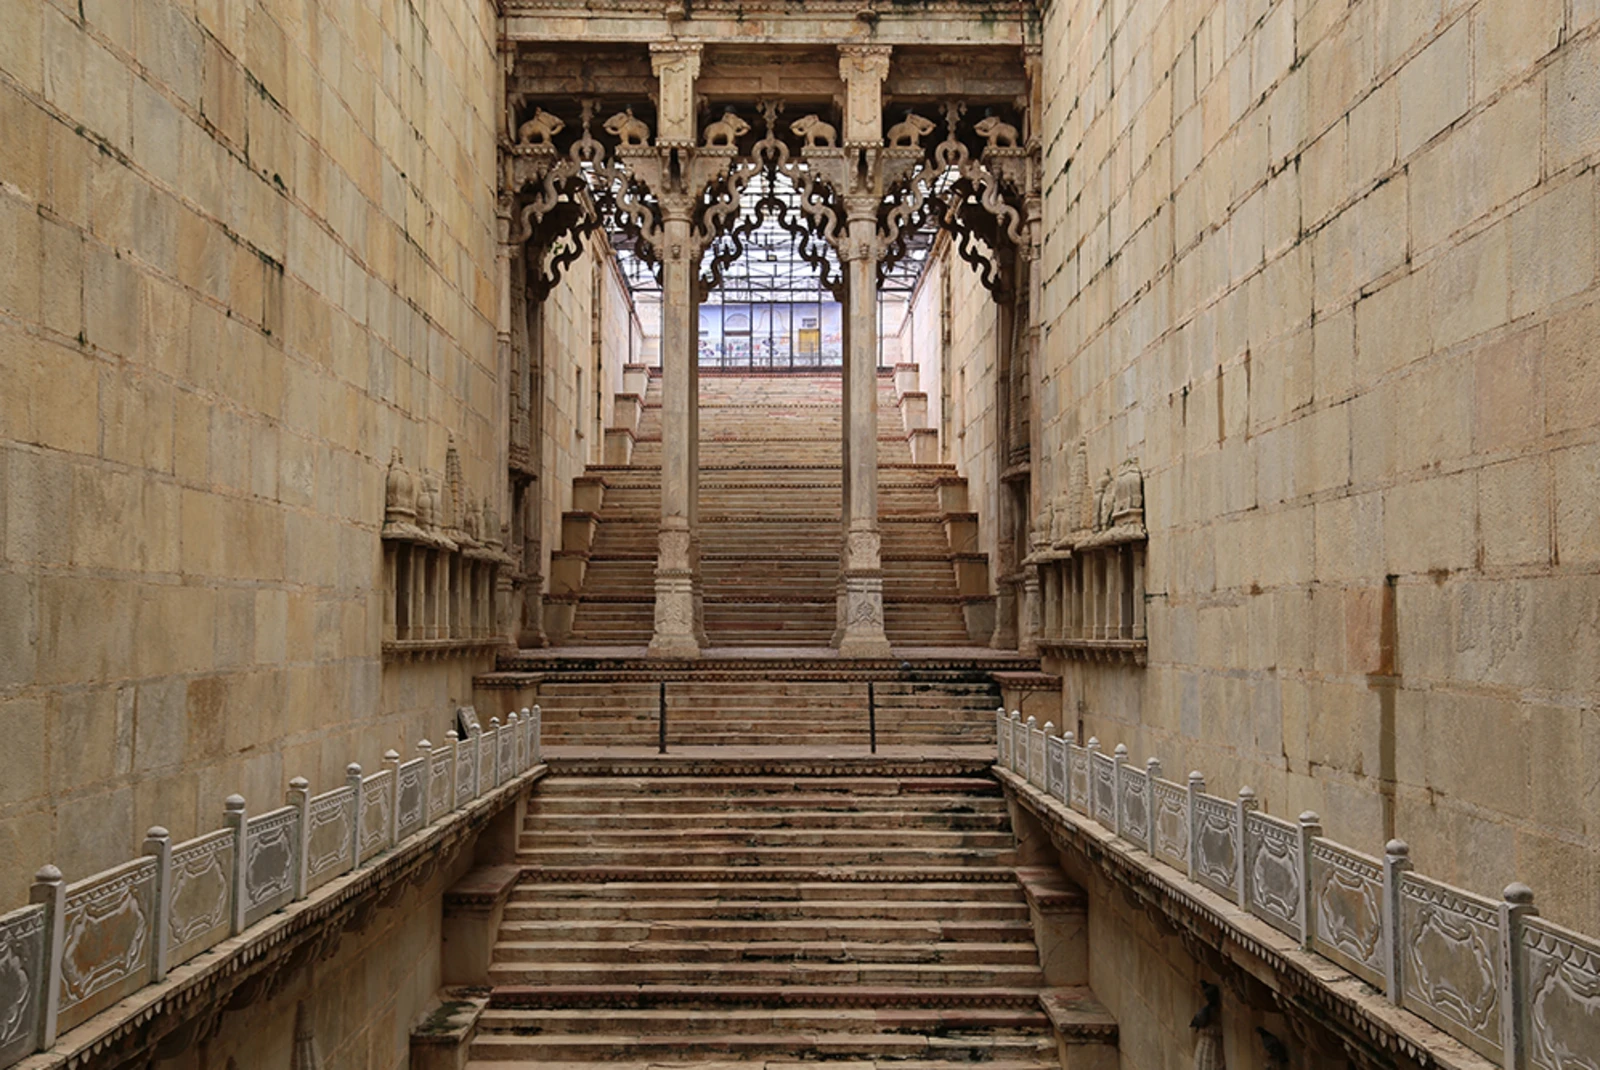 An Architectural Journey in Rajasthan, India - Day 3: Bundi